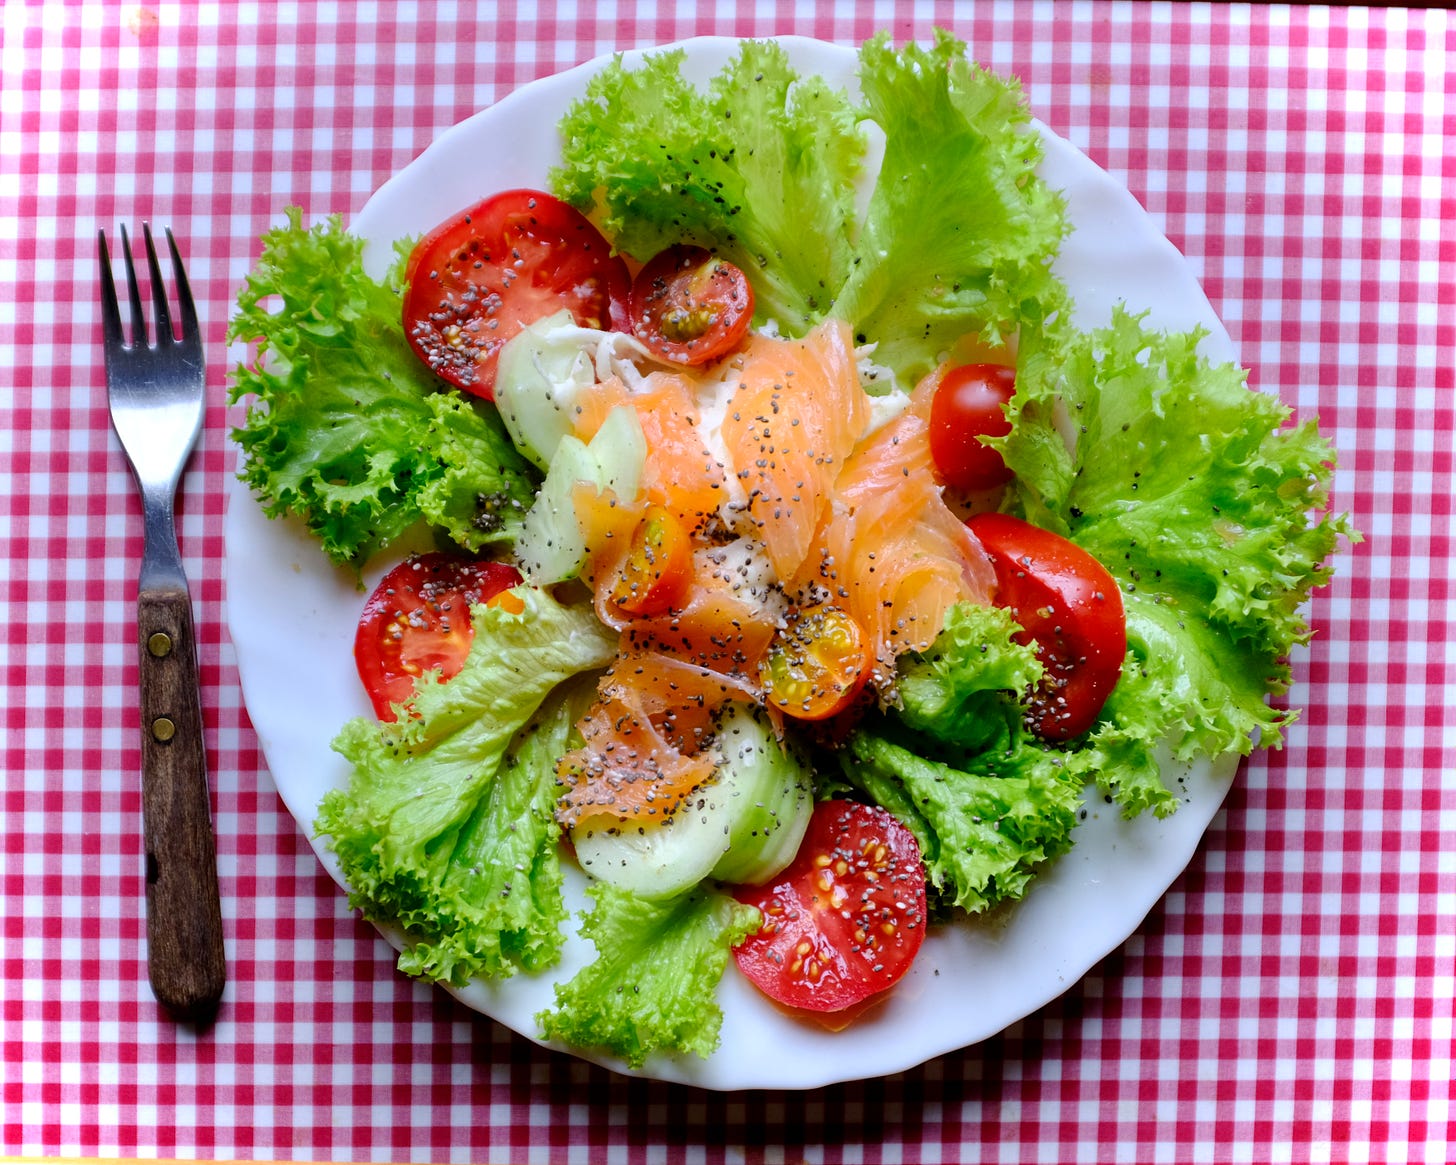 Smoked salmon salad on white plate placed on red and white gingham cloth